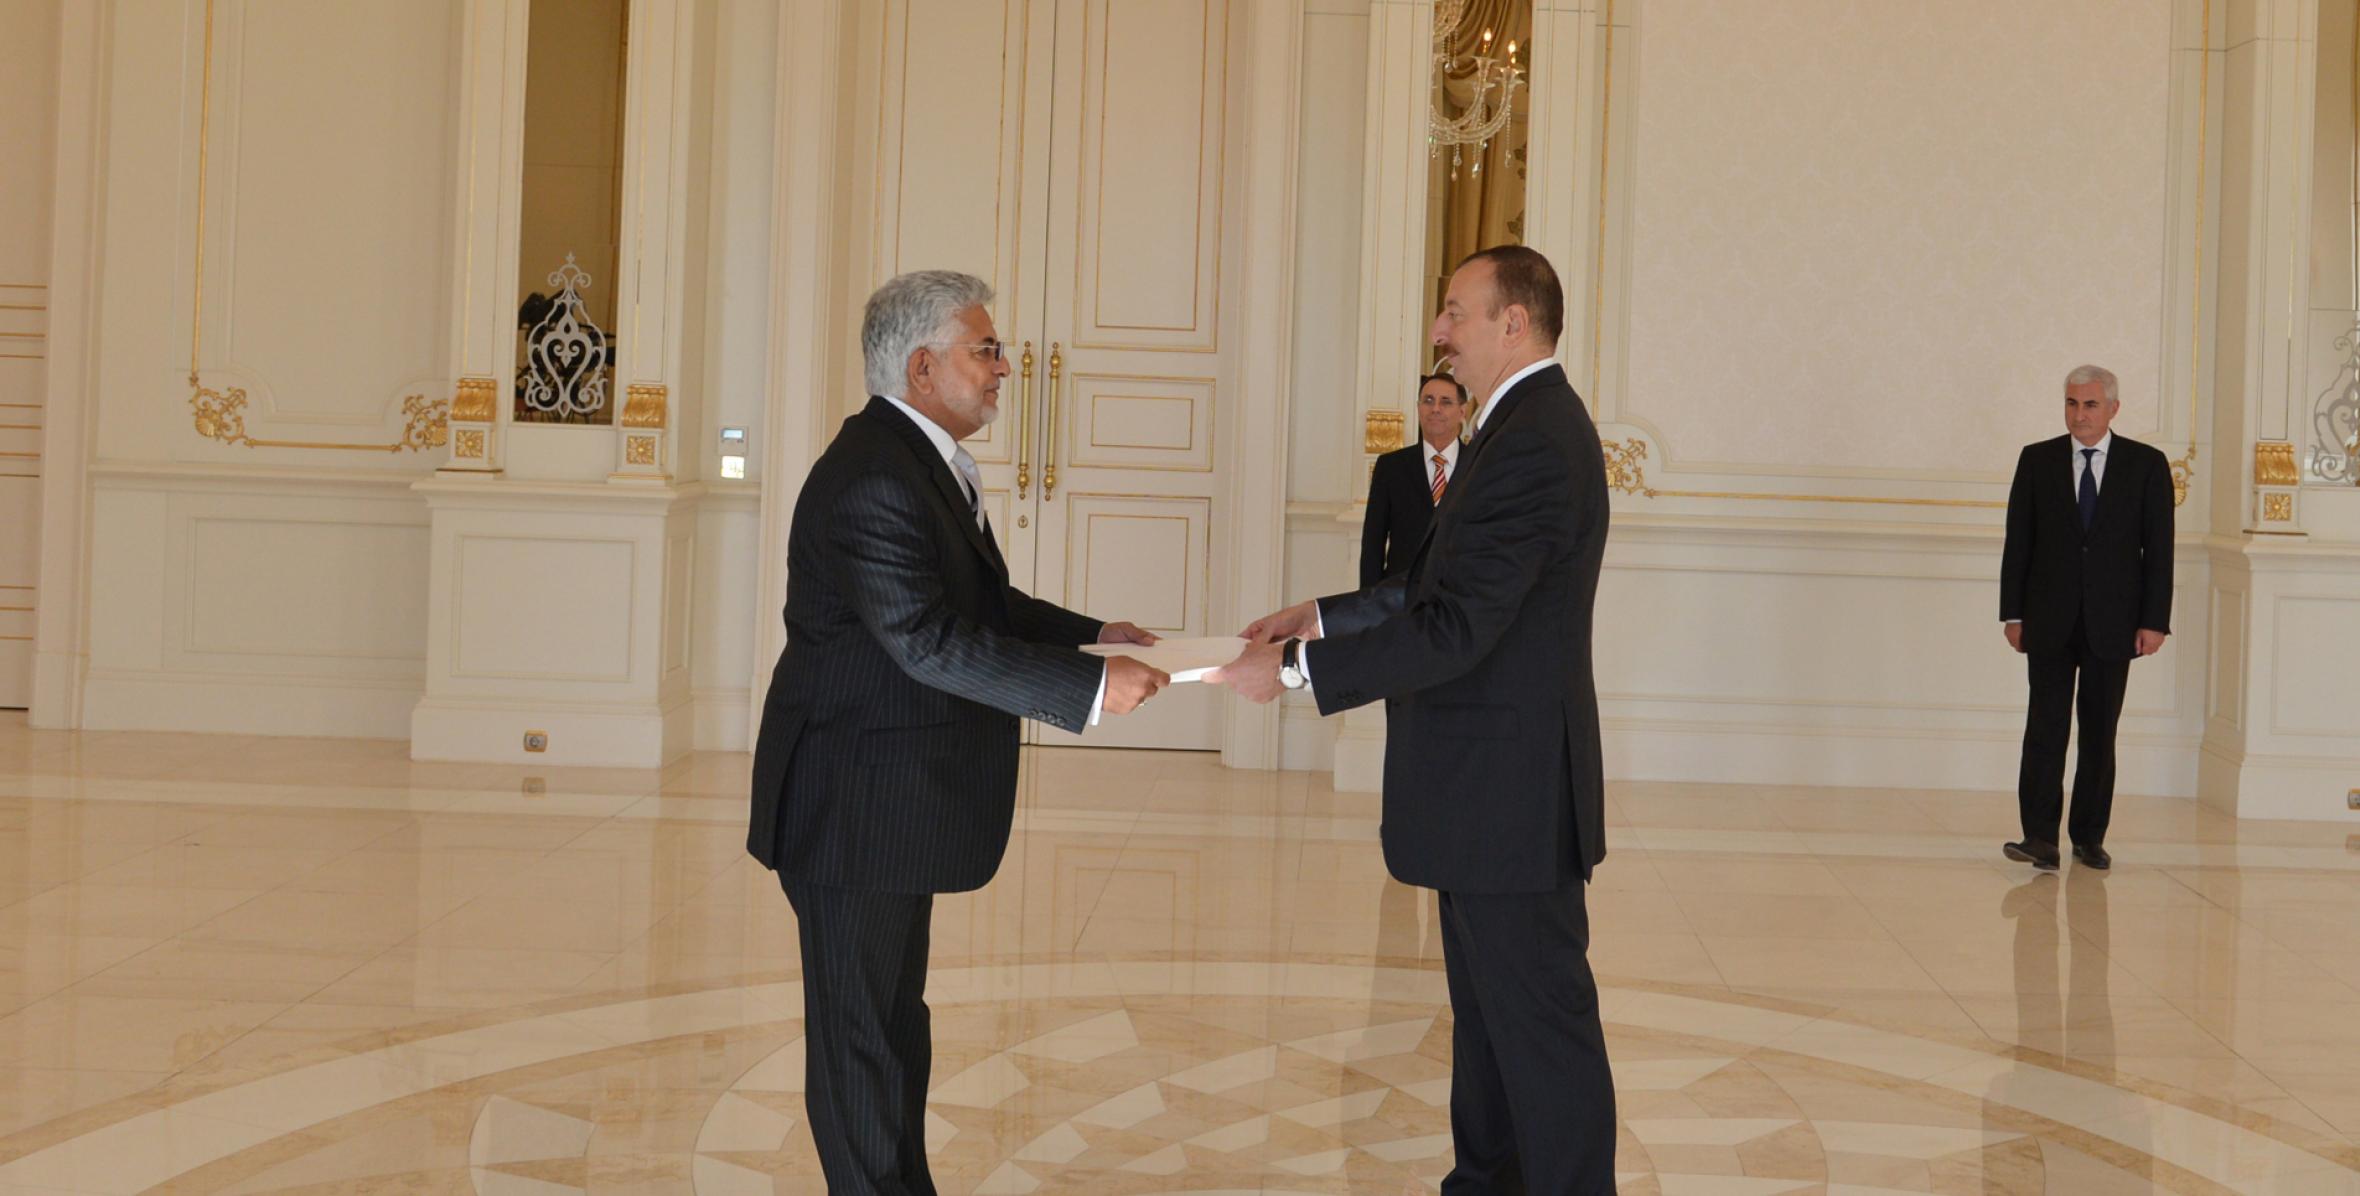 Ilham Aliyev accepted the credentials of the newly-appointed Ambassador of Pakistan to Azerbaijan